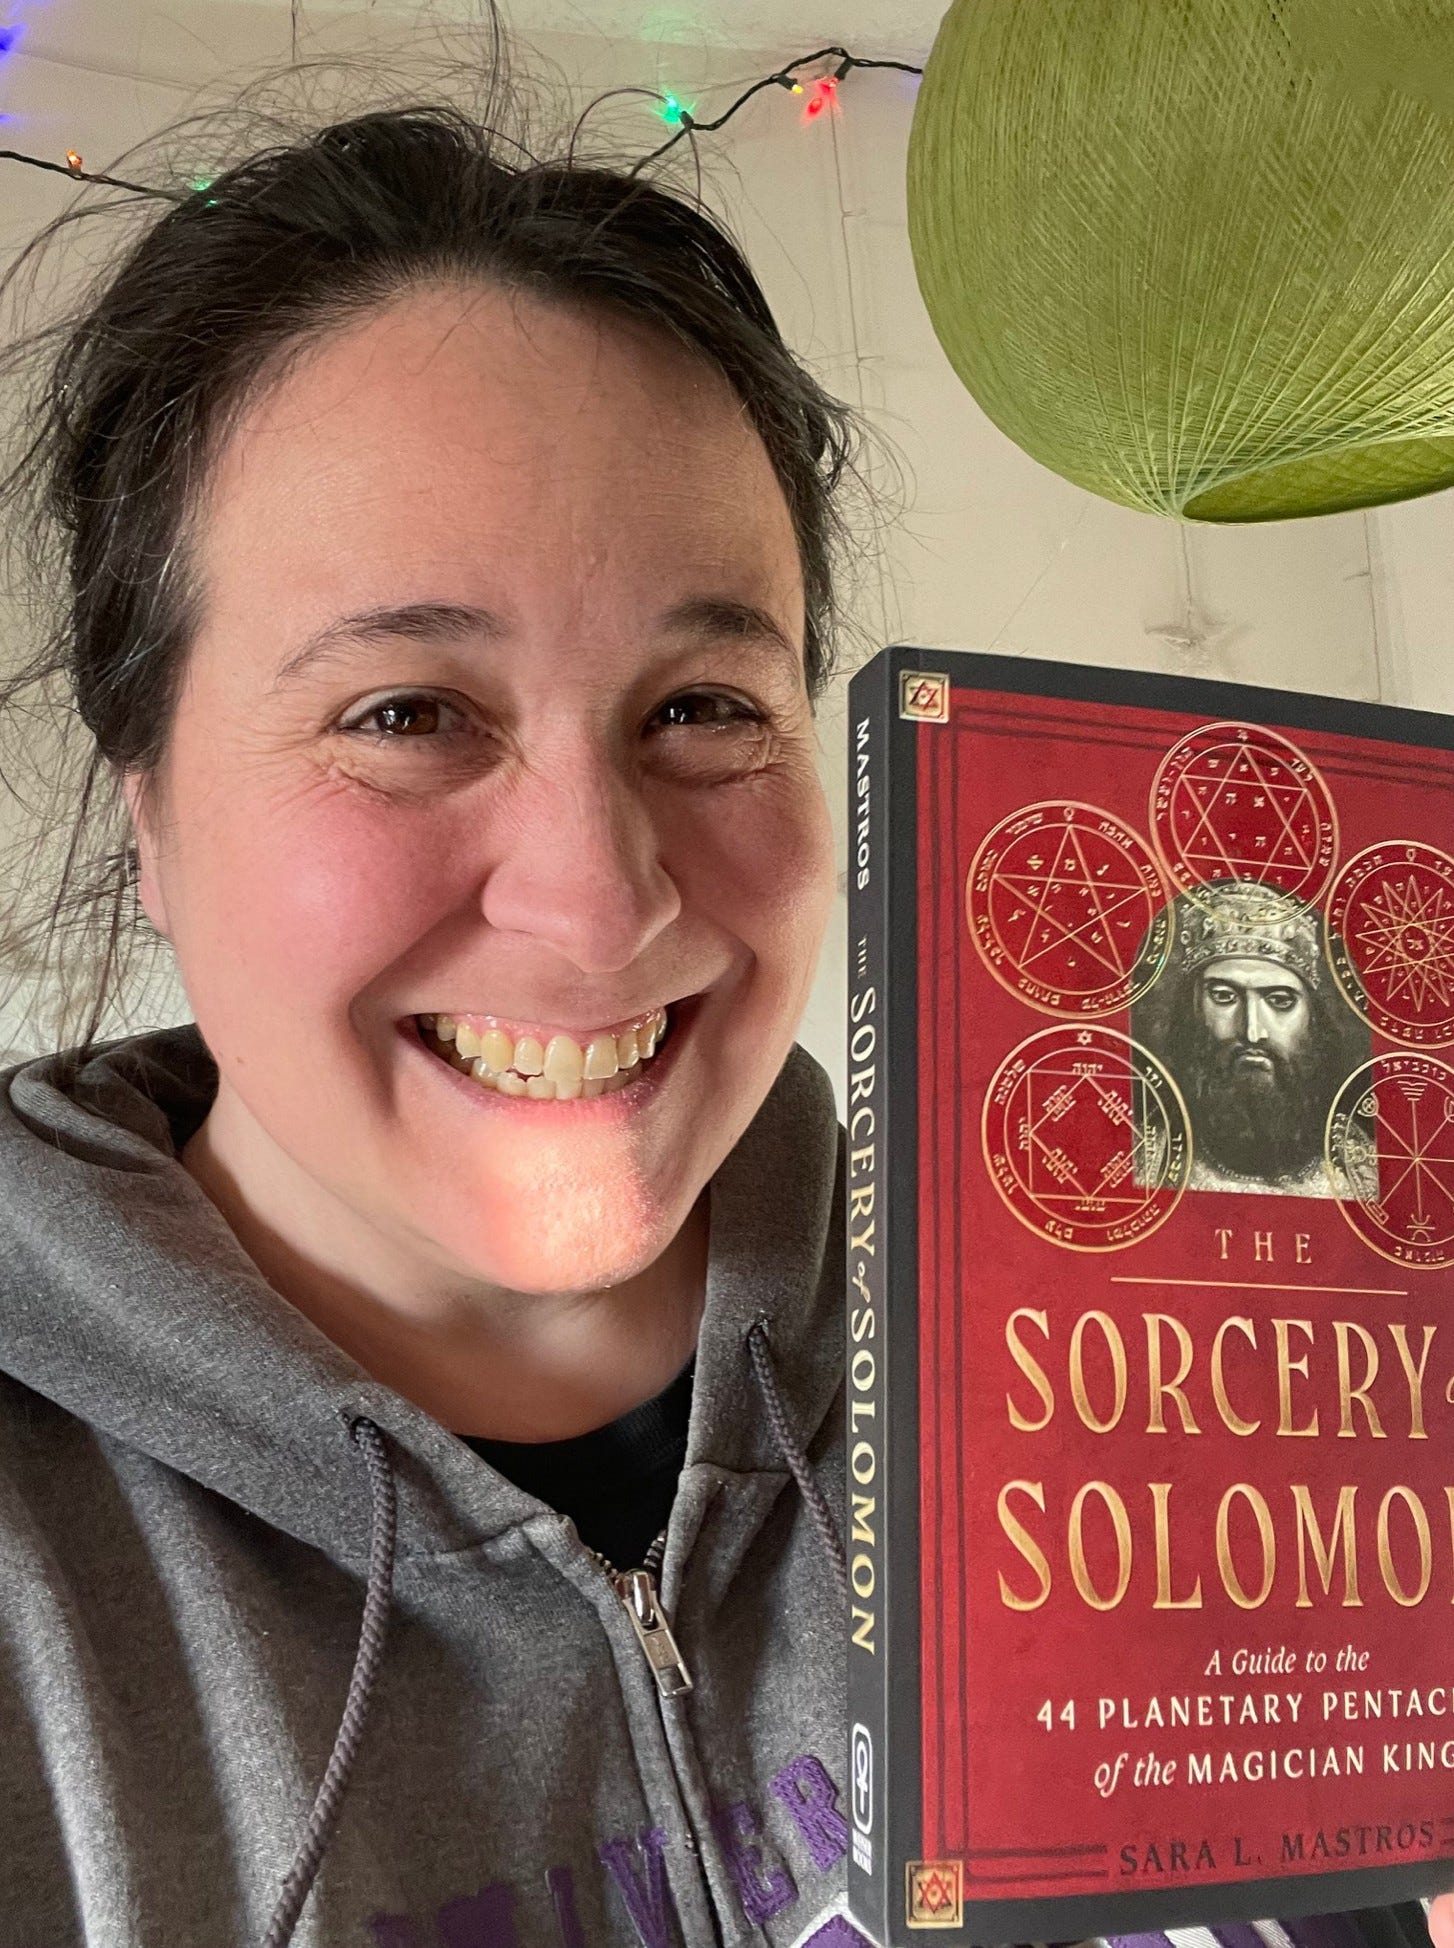 A photo of Monica holding the red and black book entitled The Sorcery of Solomon in gold capital lettering and with subtitles of “A guide to the 44 planetary pentacles of the magician king” by Sara L. Mastros.